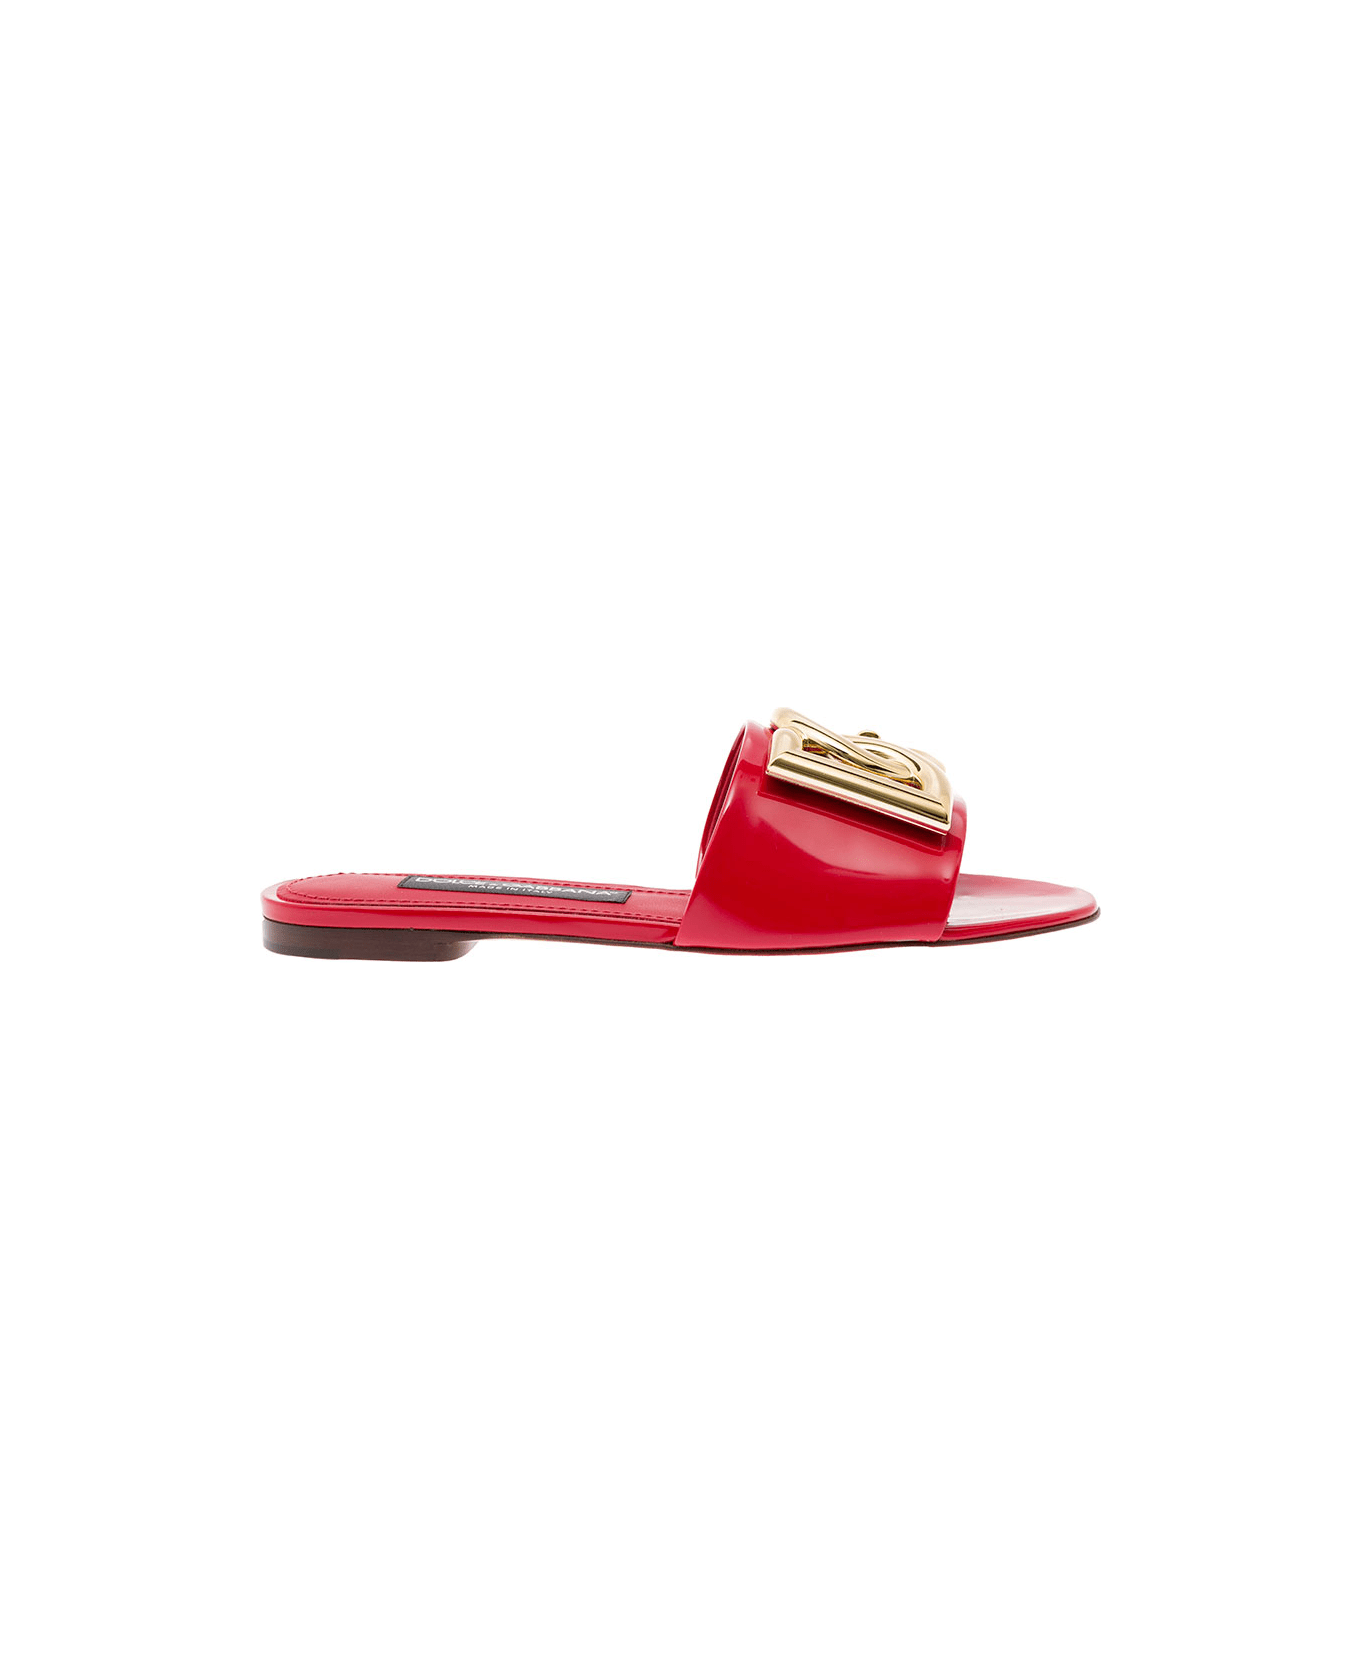 Dolce & Gabbana Red Sliders With Metal Dg Logo In Polished Leather Woman - Red